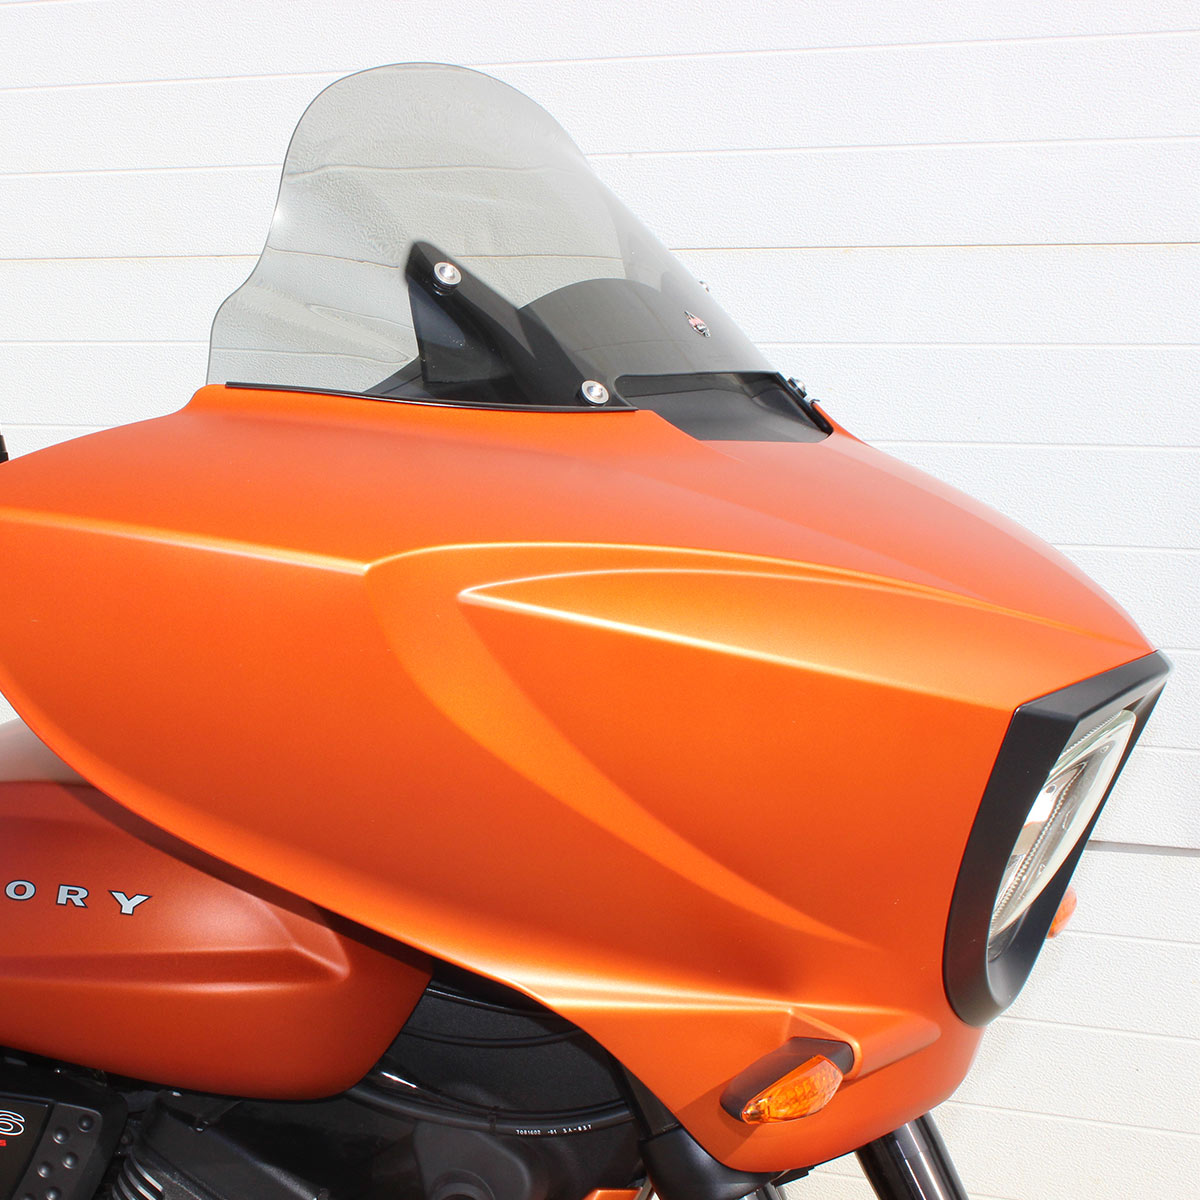 11" Tint Flare™ Windshield For Victory® Cross Country motorcycle models